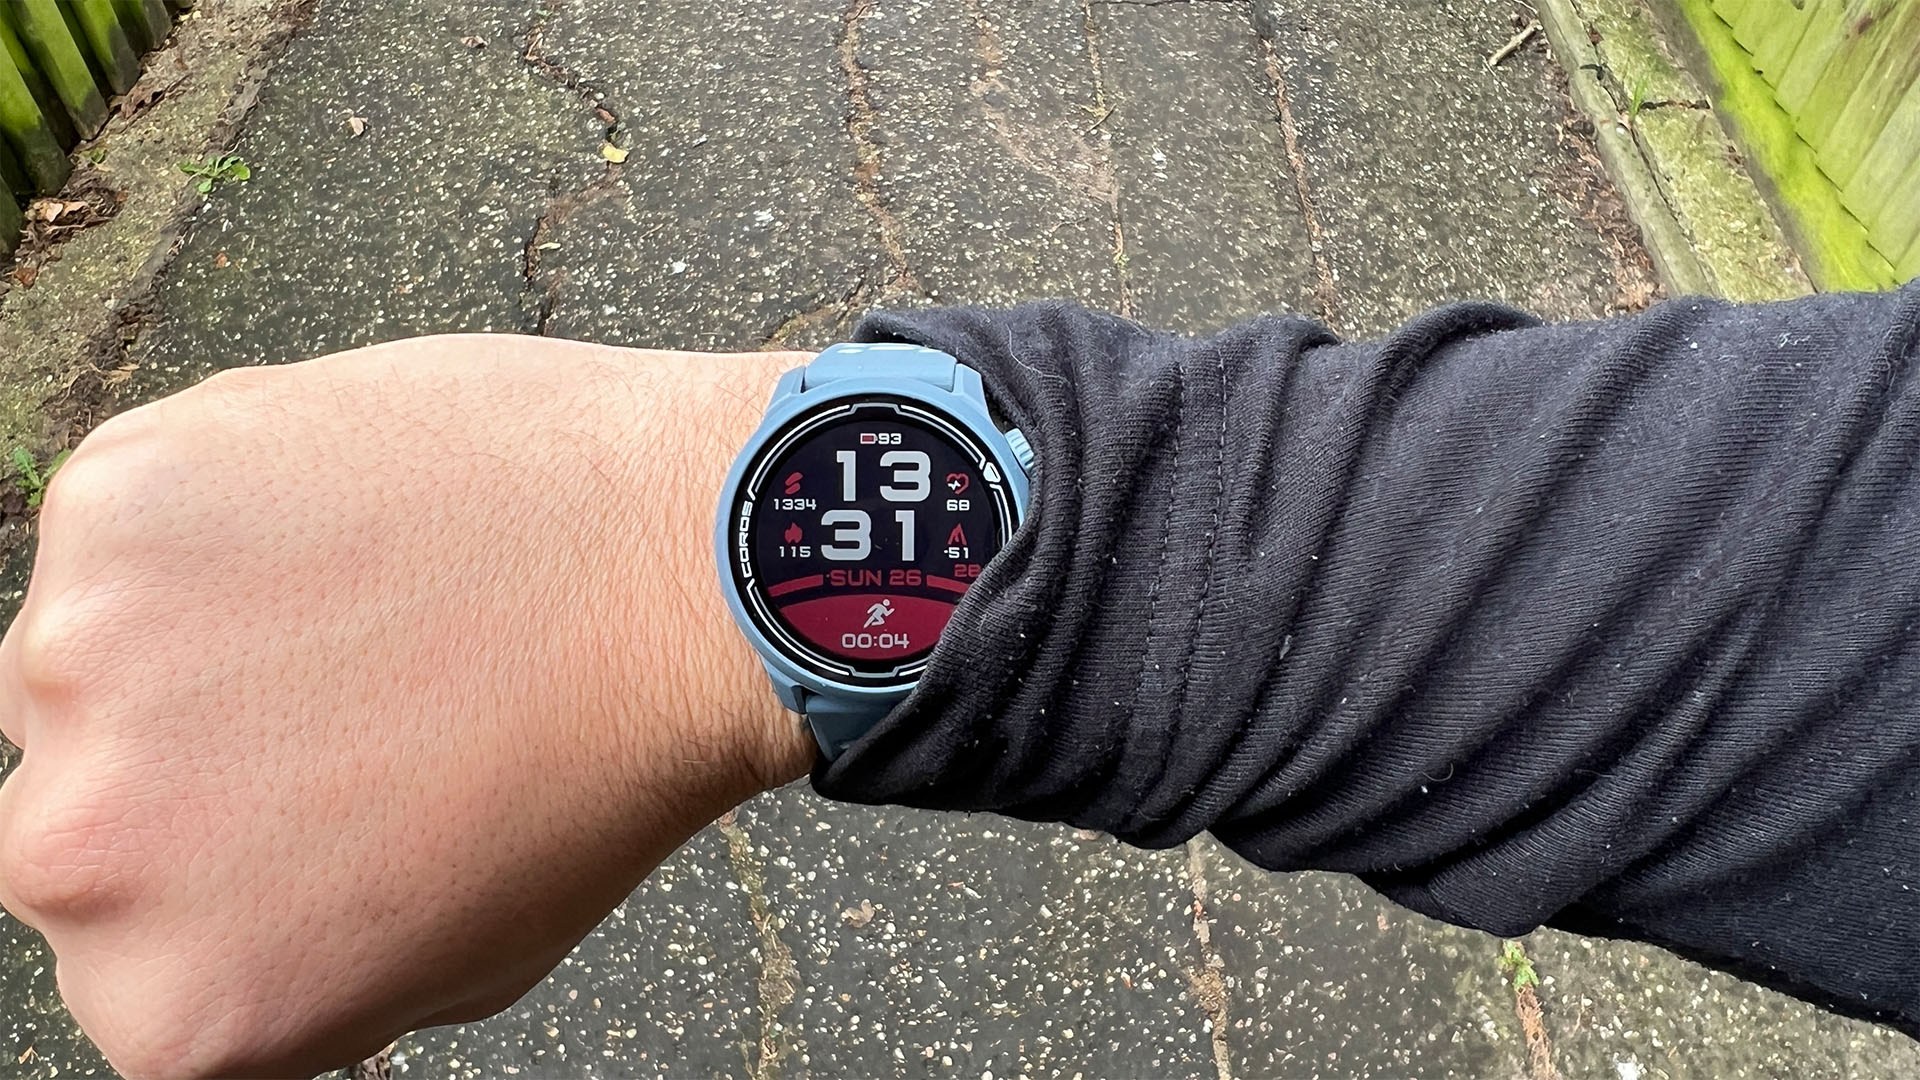 Coros Pace 2 review: A serious sports watch at a very reasonable